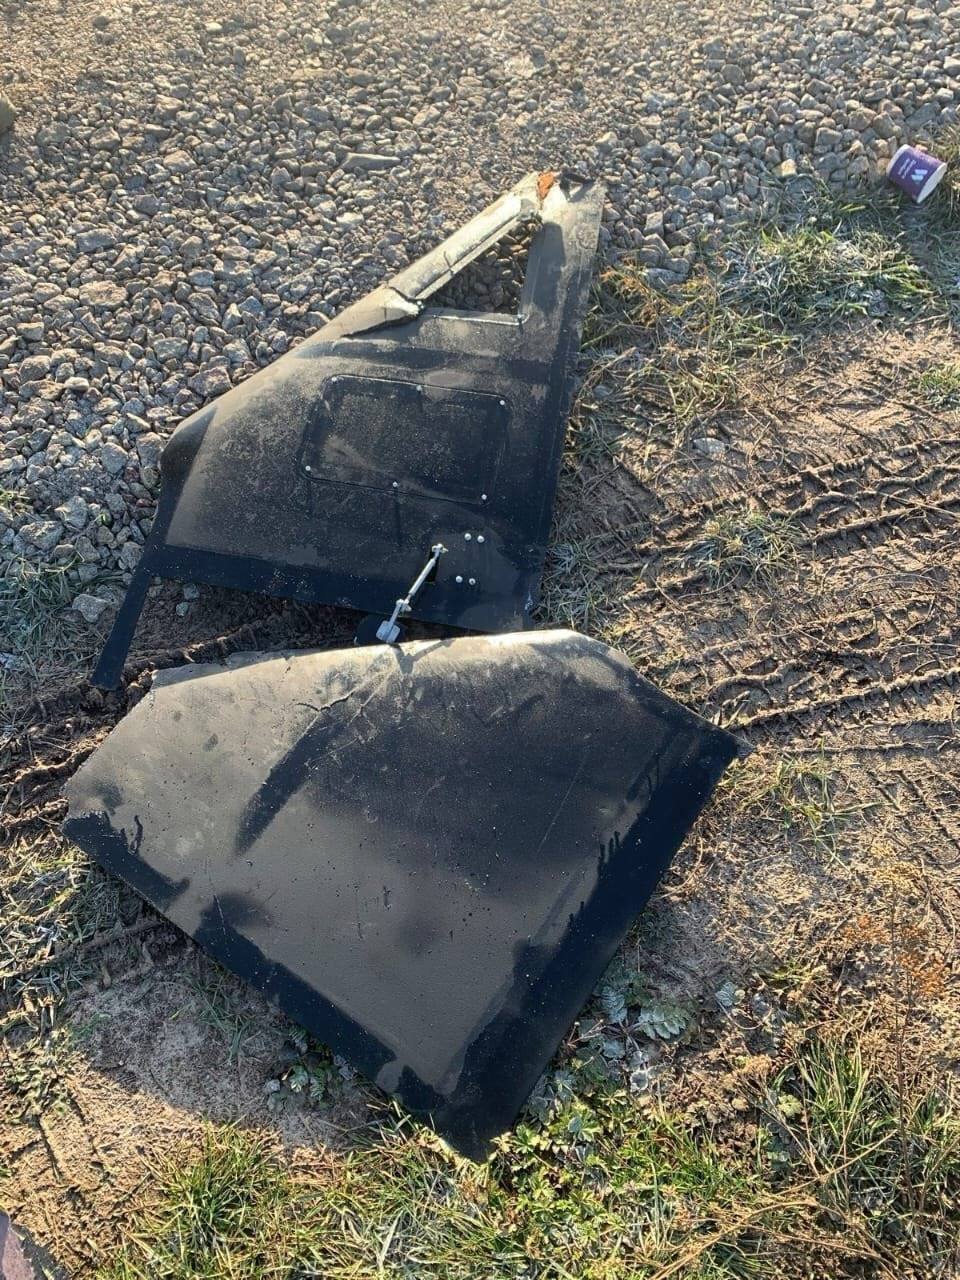 Occupants launched black Shaheds in Ukraine: the Air Force explained what it means